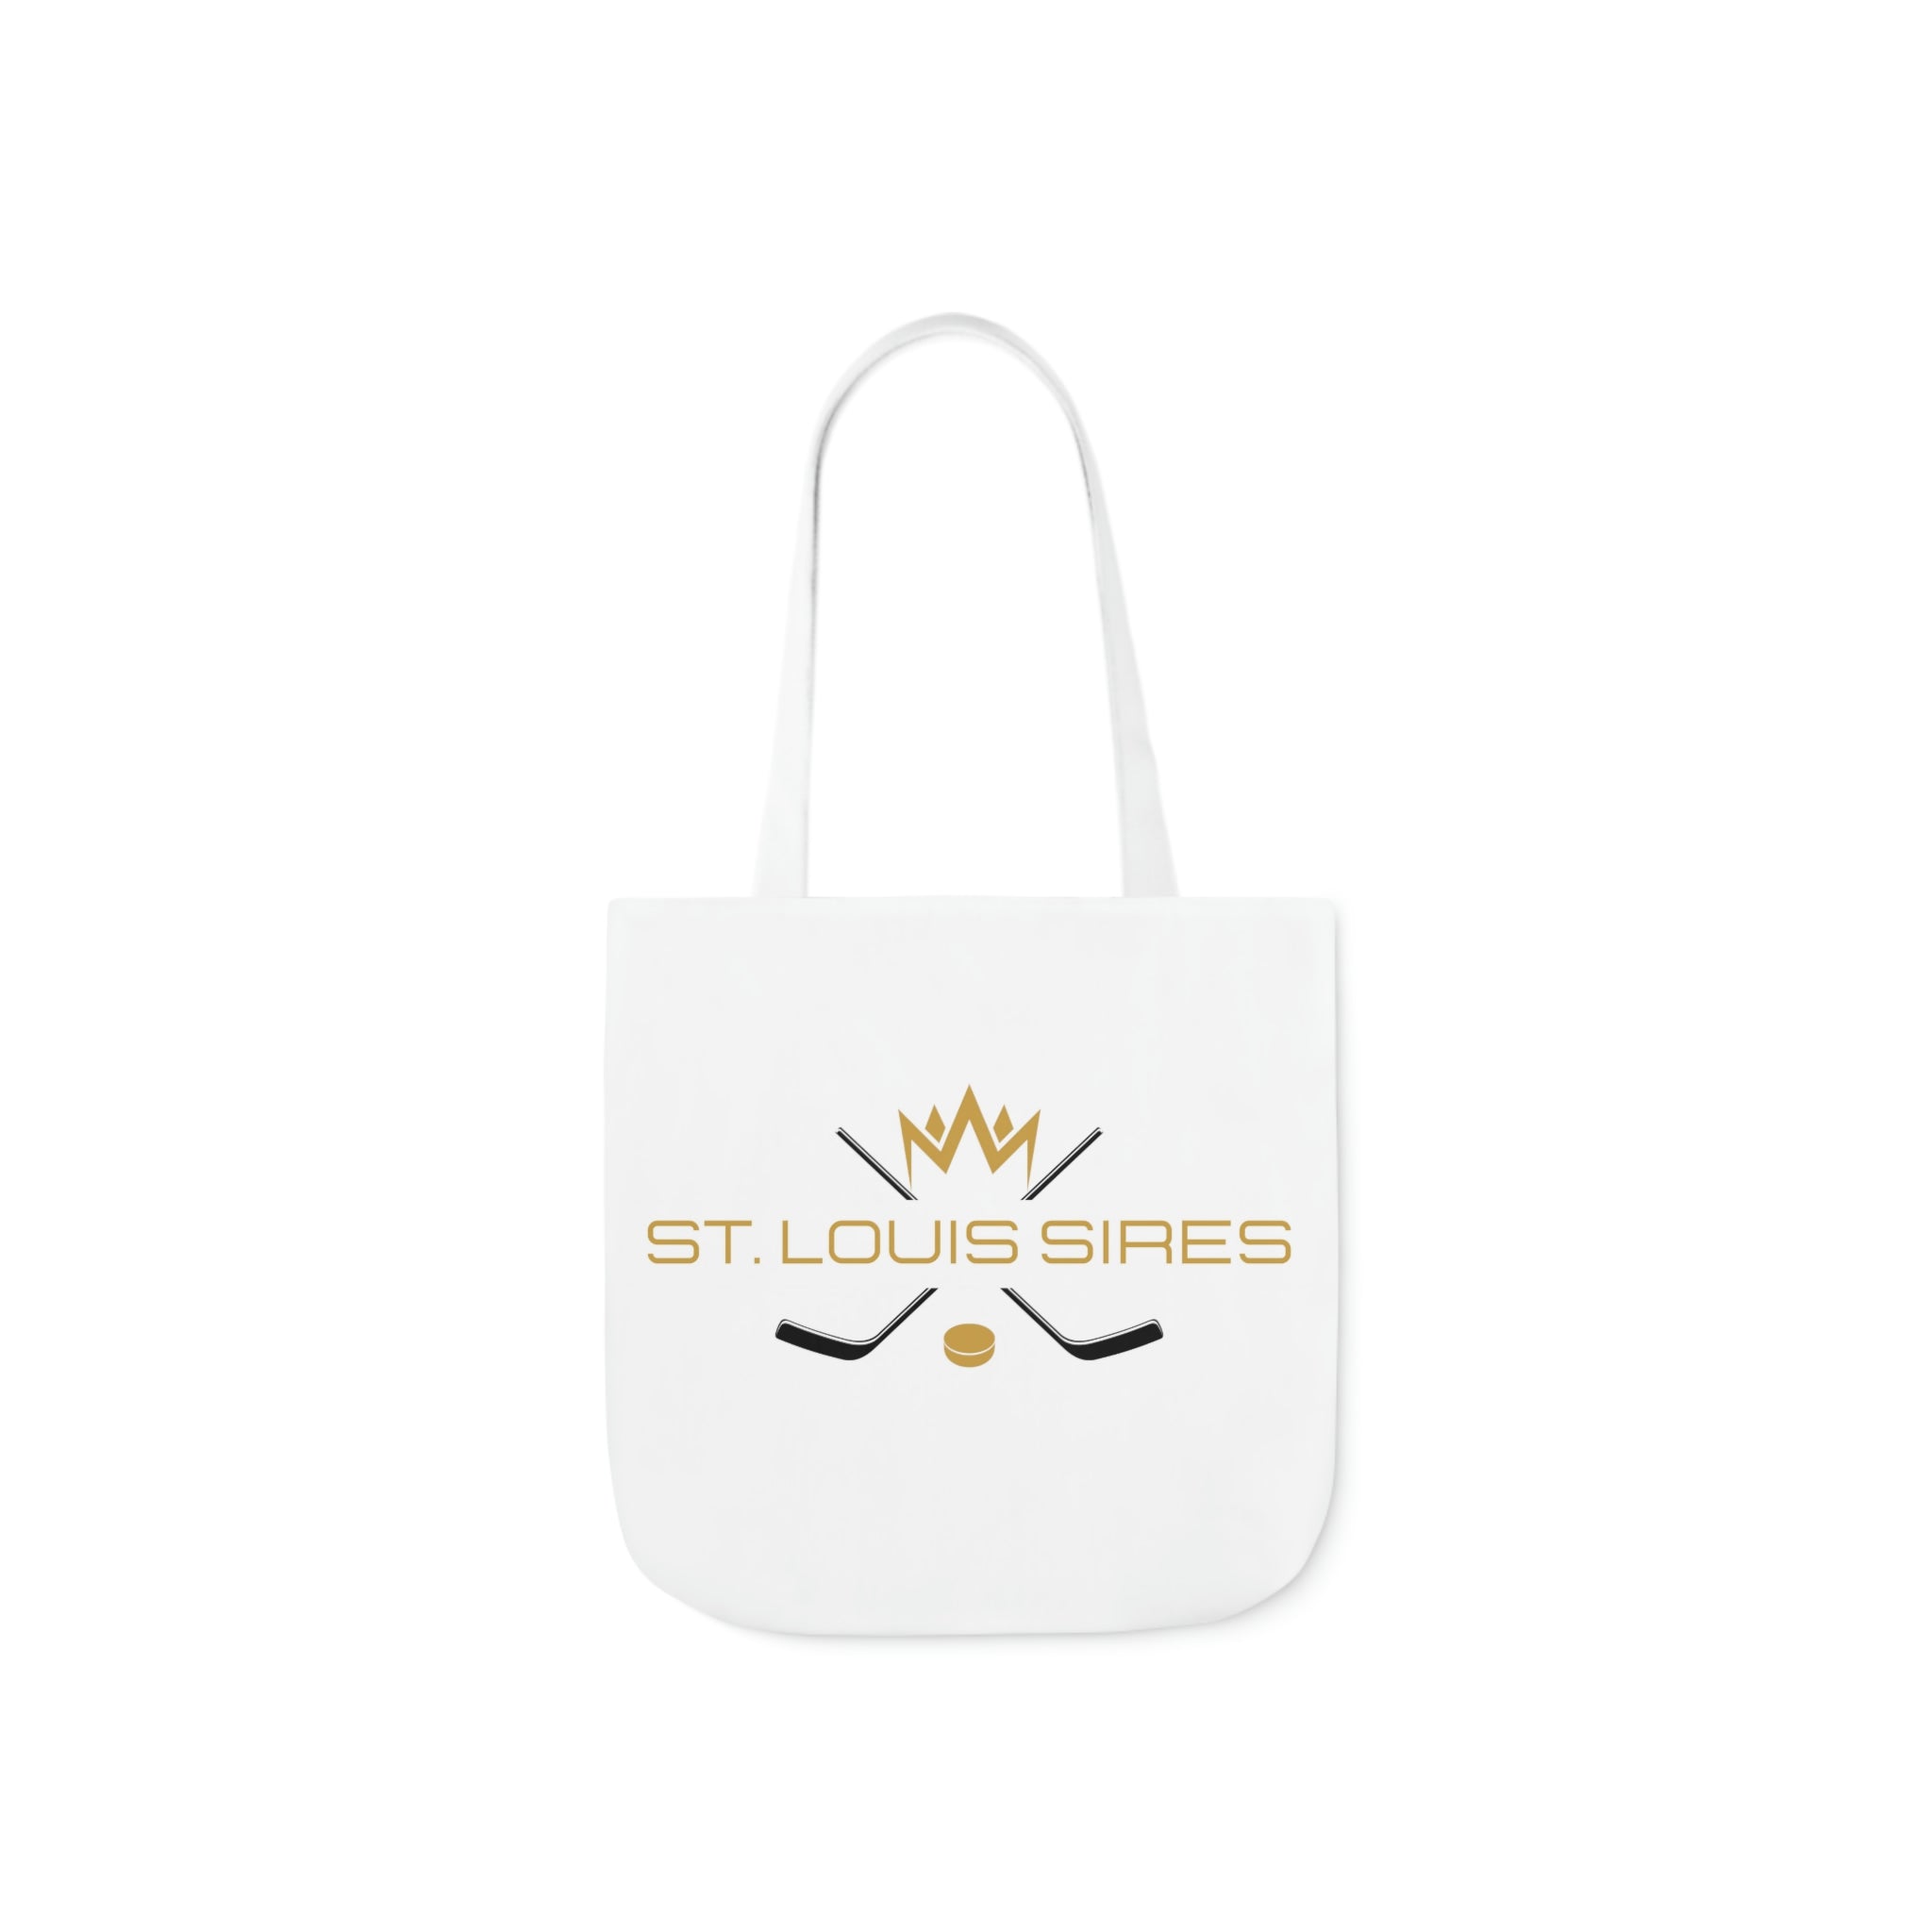 St. Louis Sires Canvas Tote Bag